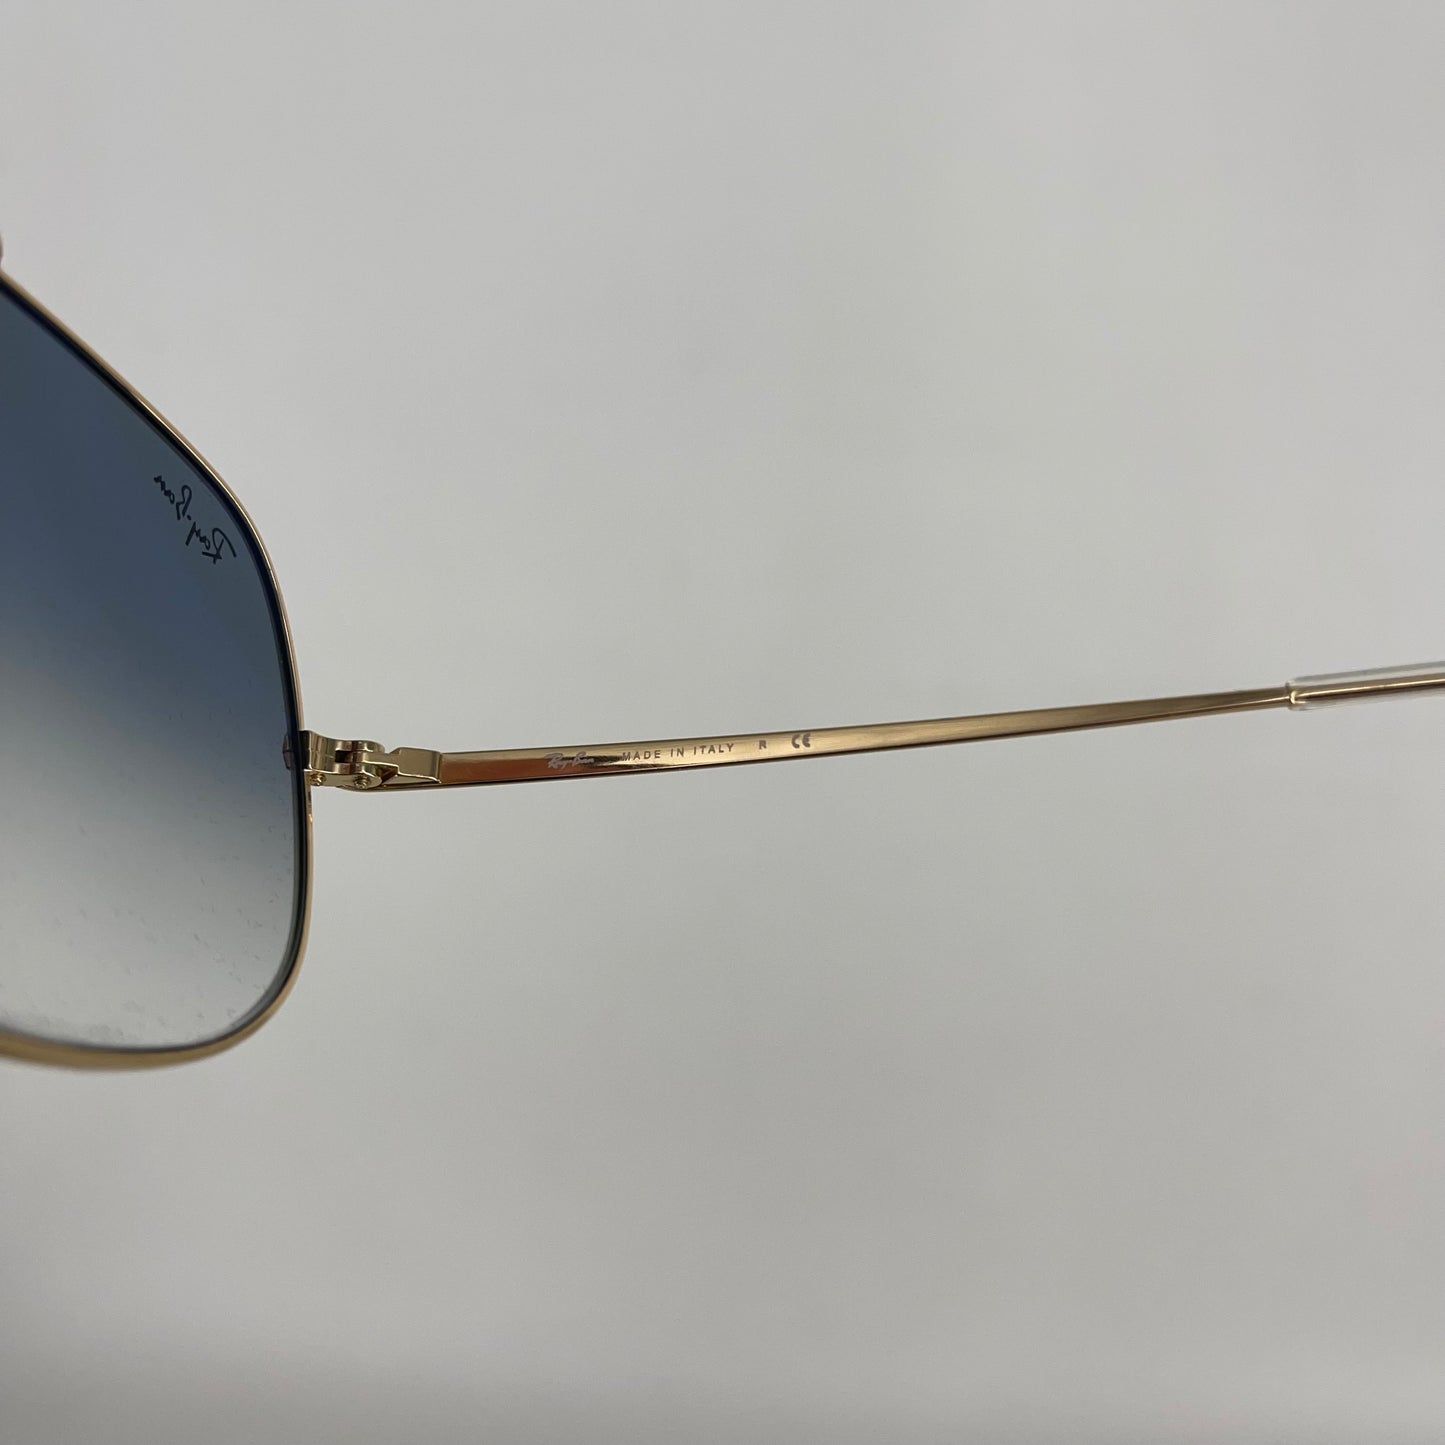 Authentic Ray Bans Gold Aviators with Blue Lenses RB3561